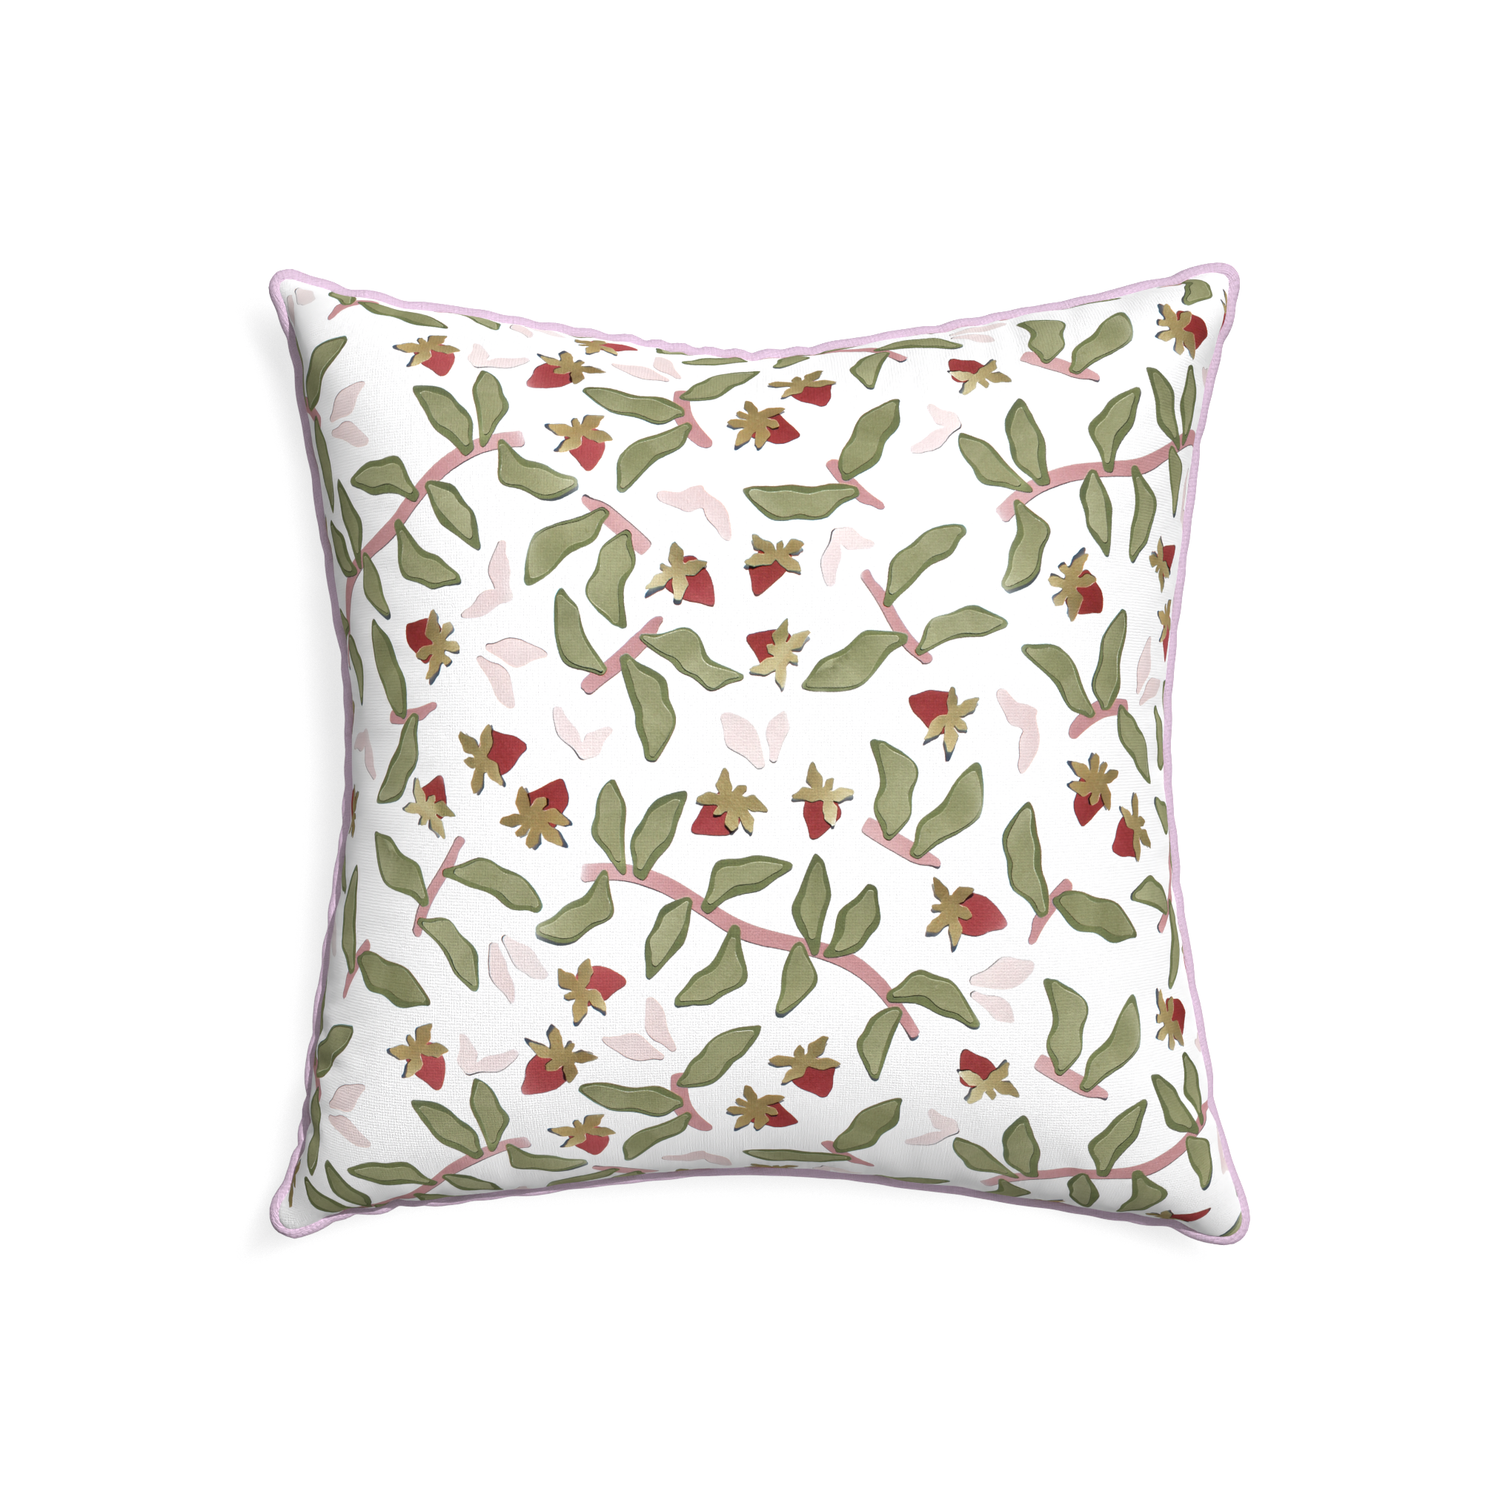 22-square nellie custom pillow with l piping on white background